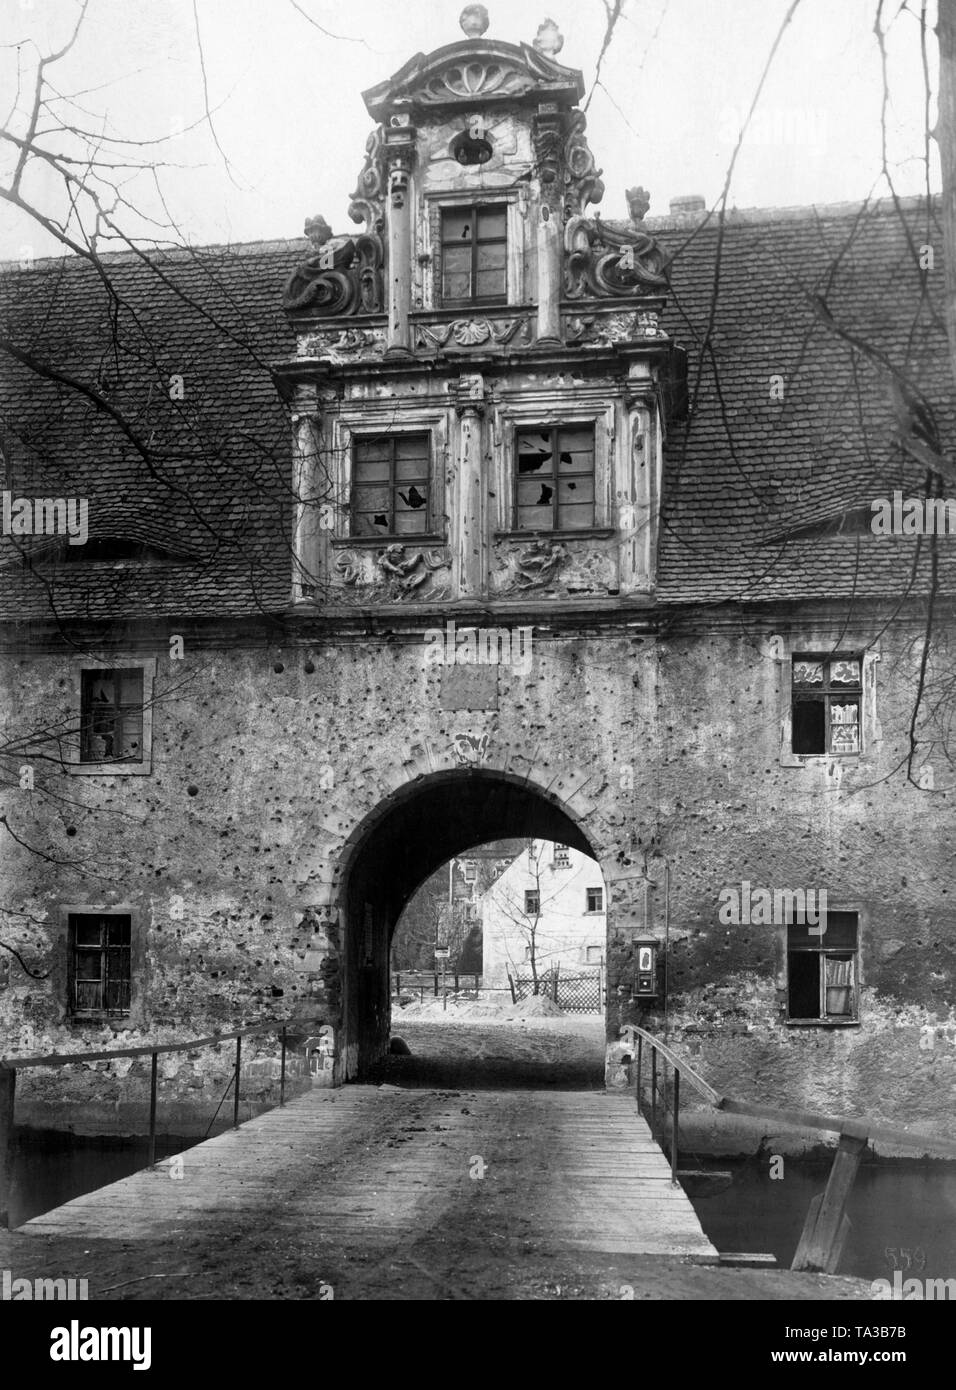 Gatehouse of Castle Doelitz, Saxony, from the 17th century. The castle was fought on 18.10.1813 during the Battle of the Nations near Leipzig - around the gate are the gunshots from the battle. Stock Photo